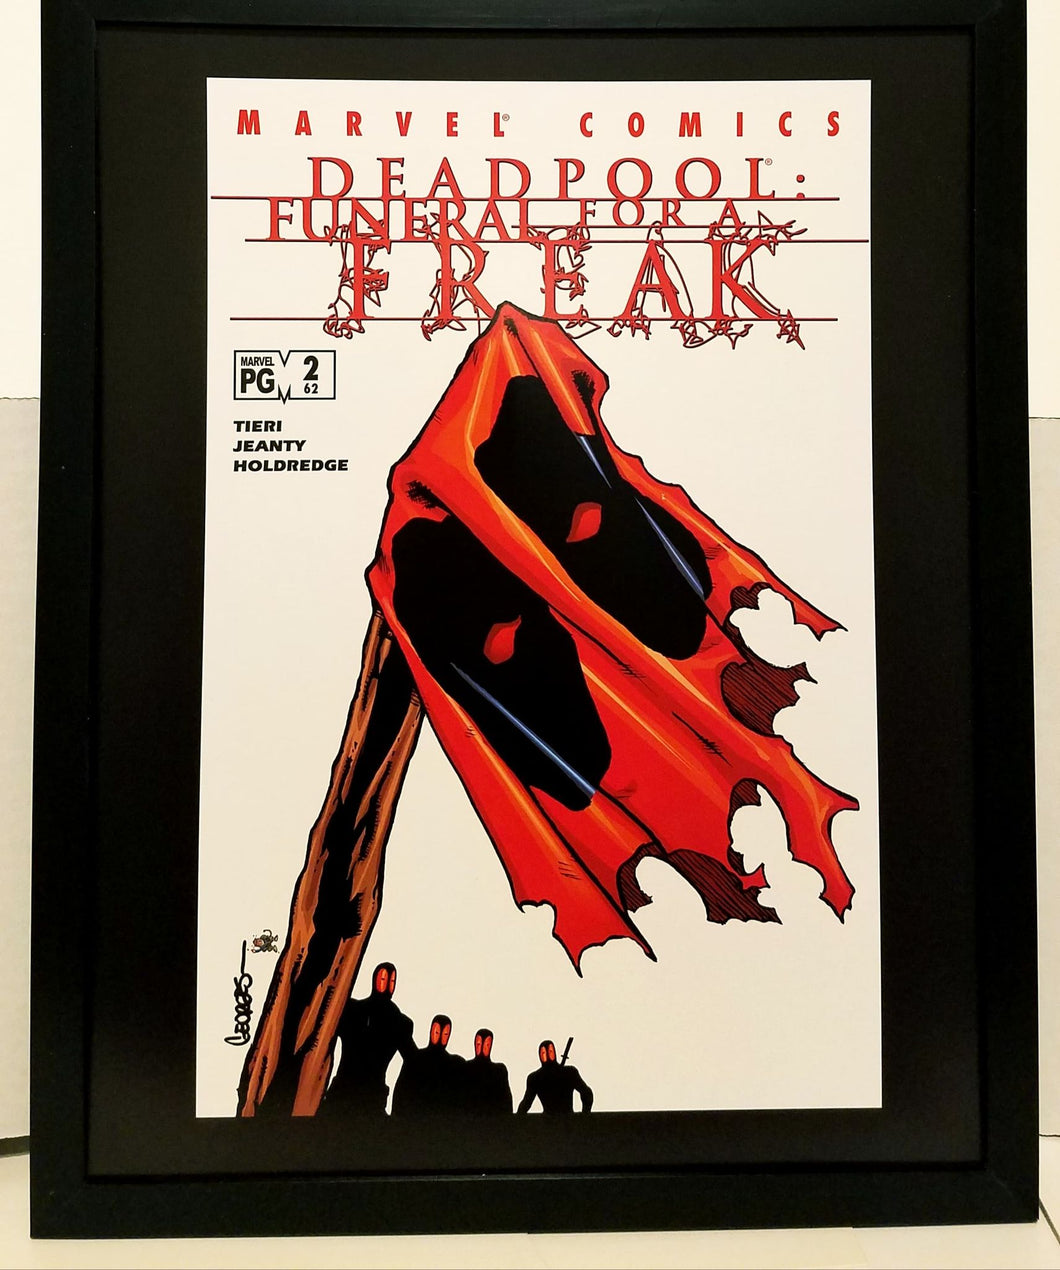 Deadpool Funeral for a Freak by Georges Jeanty 11x14 FRAMED Marvel Comics Art Print Poster